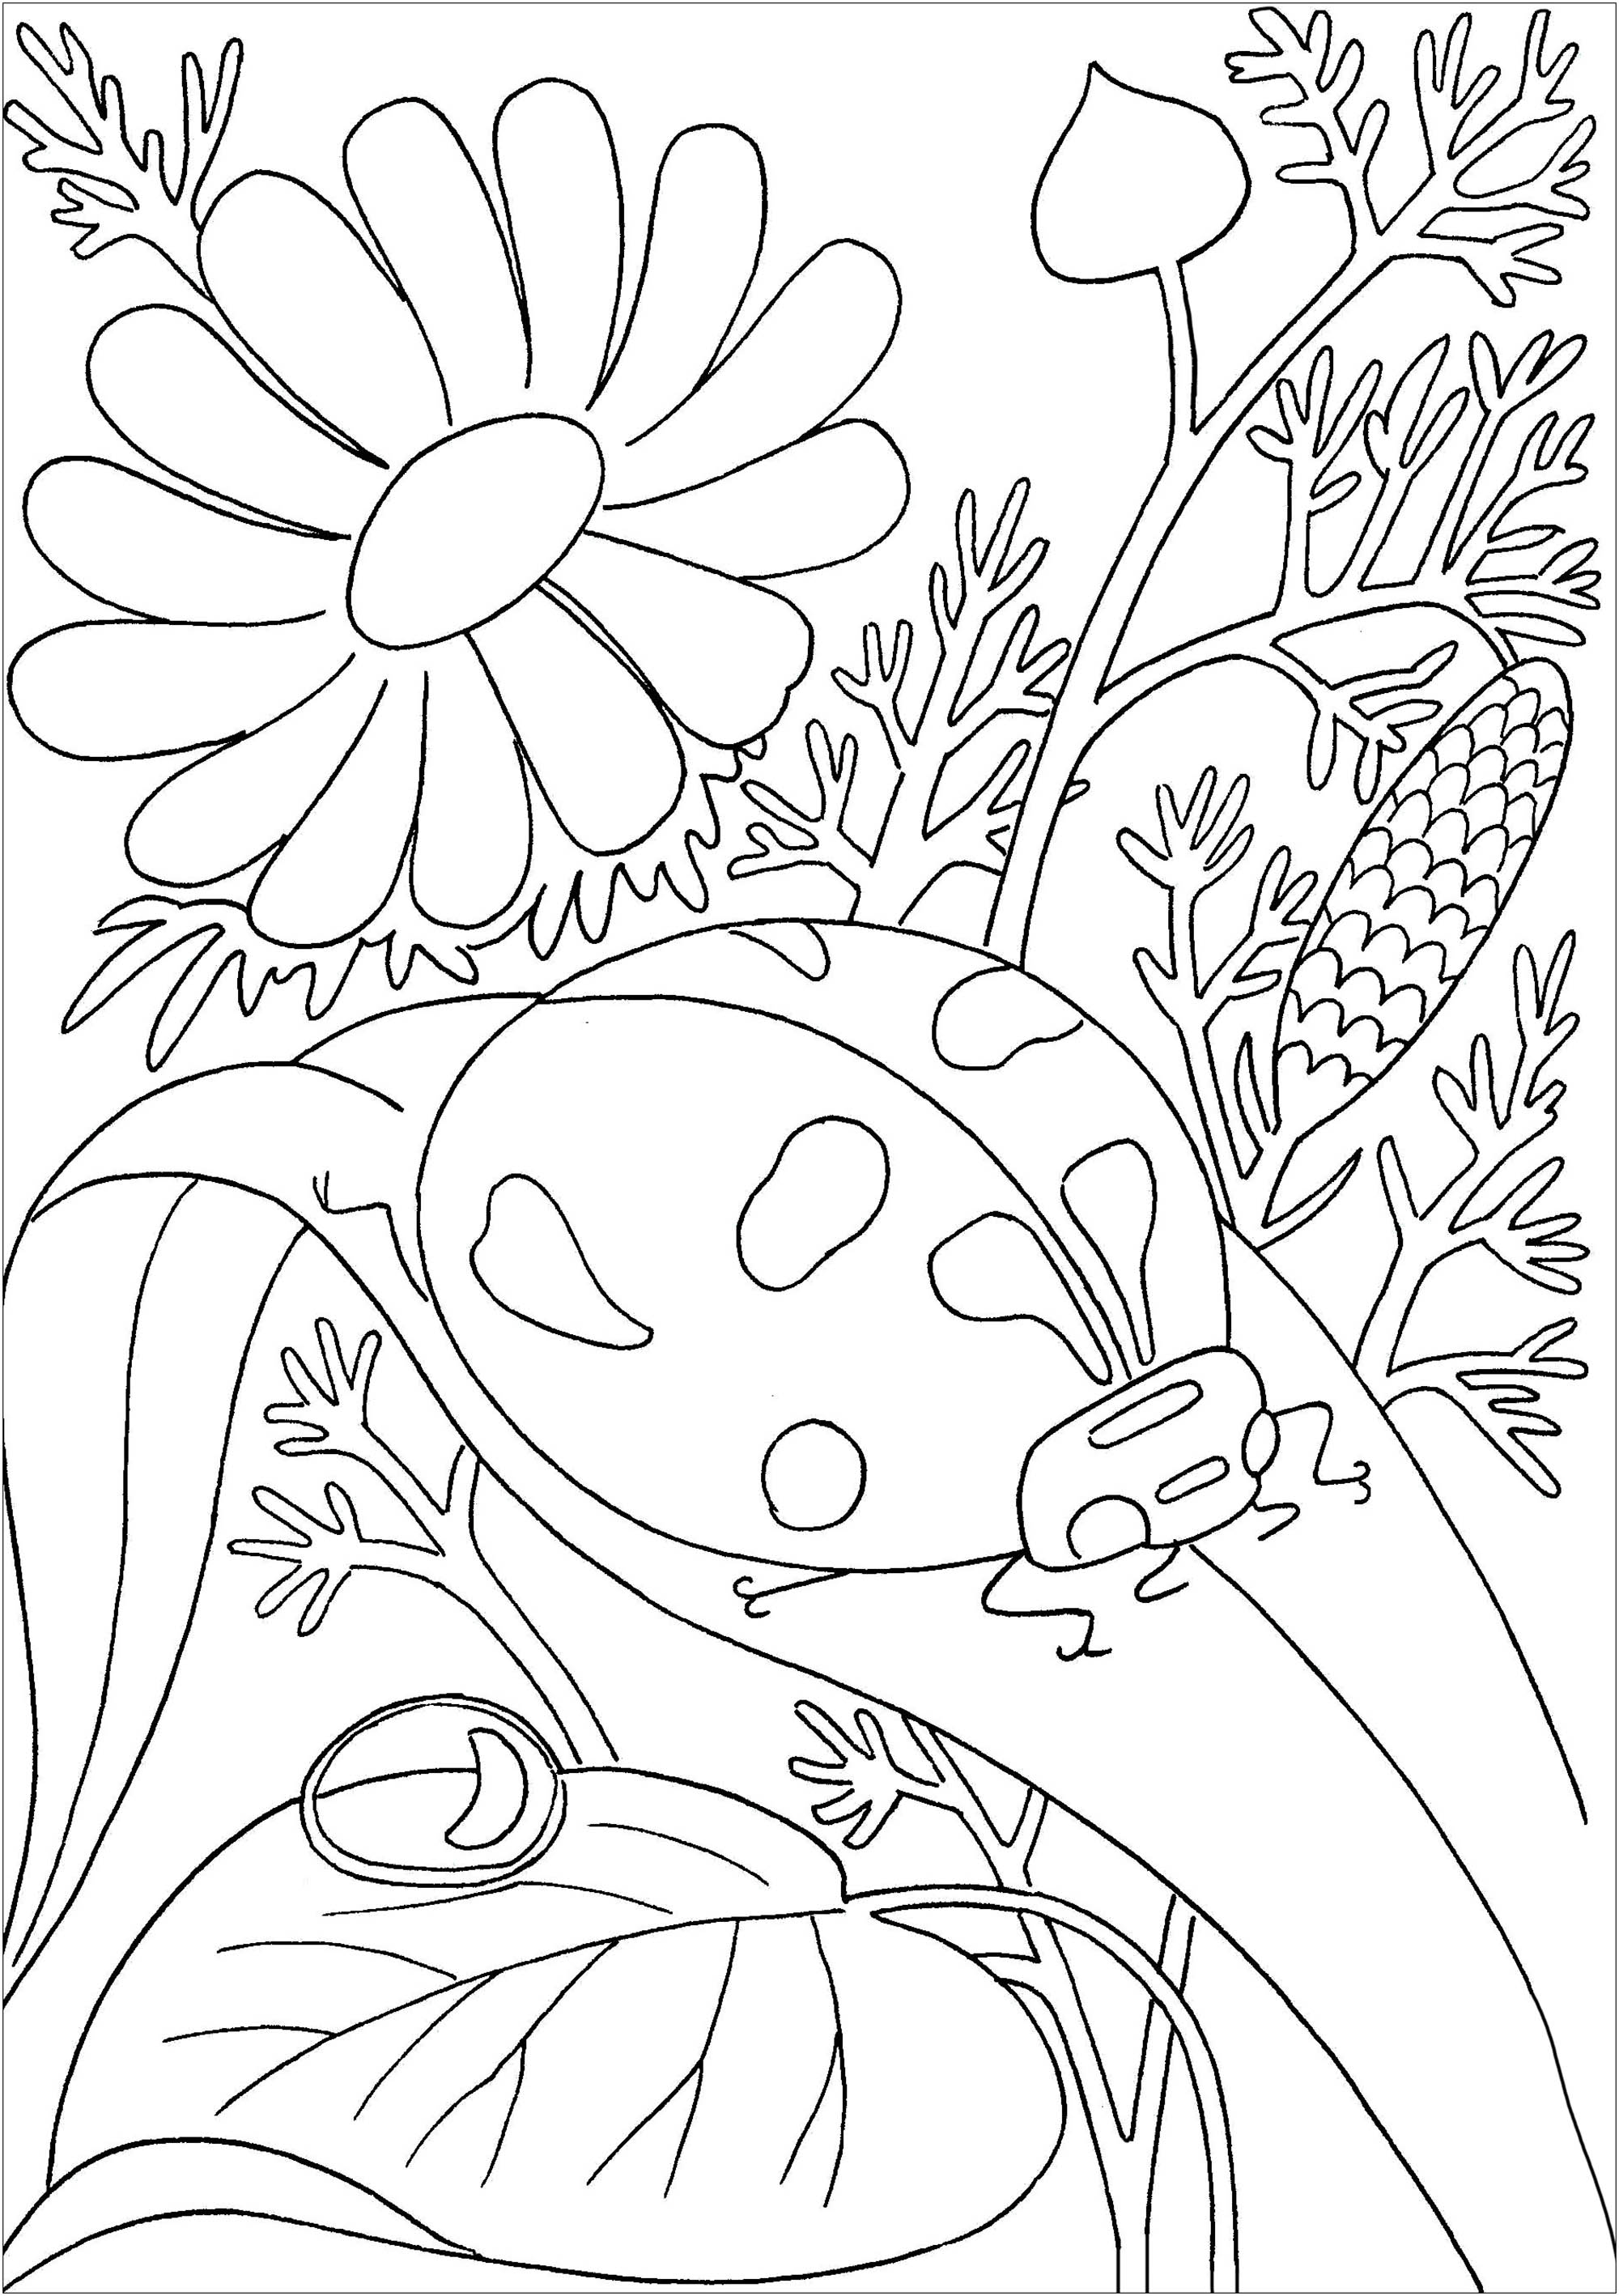 Download Ladybug on a leave - Butterflies & insects Adult Coloring ...